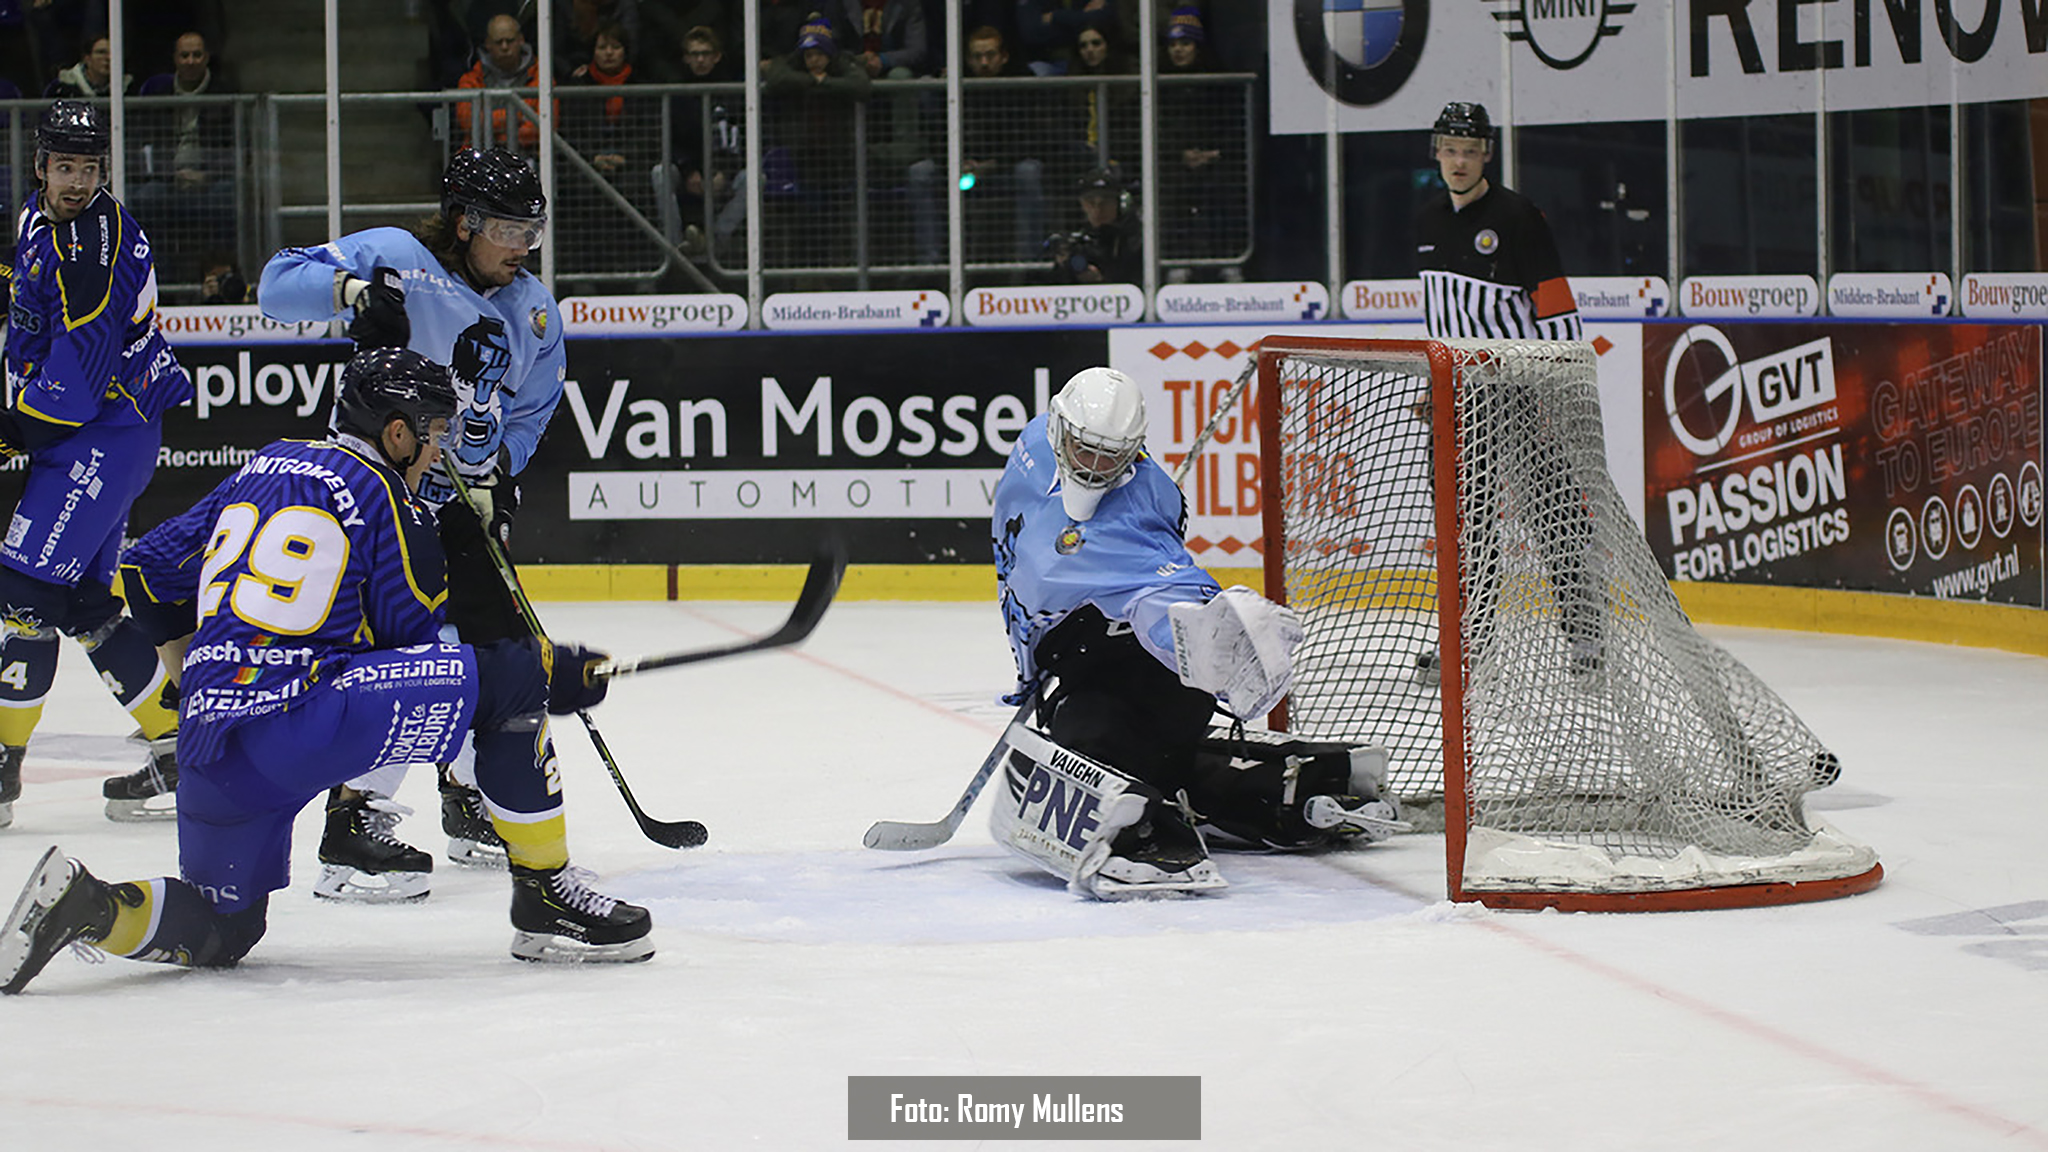 Tilburg Trappers vs. EXA Icefighters Leipzig (7-3)